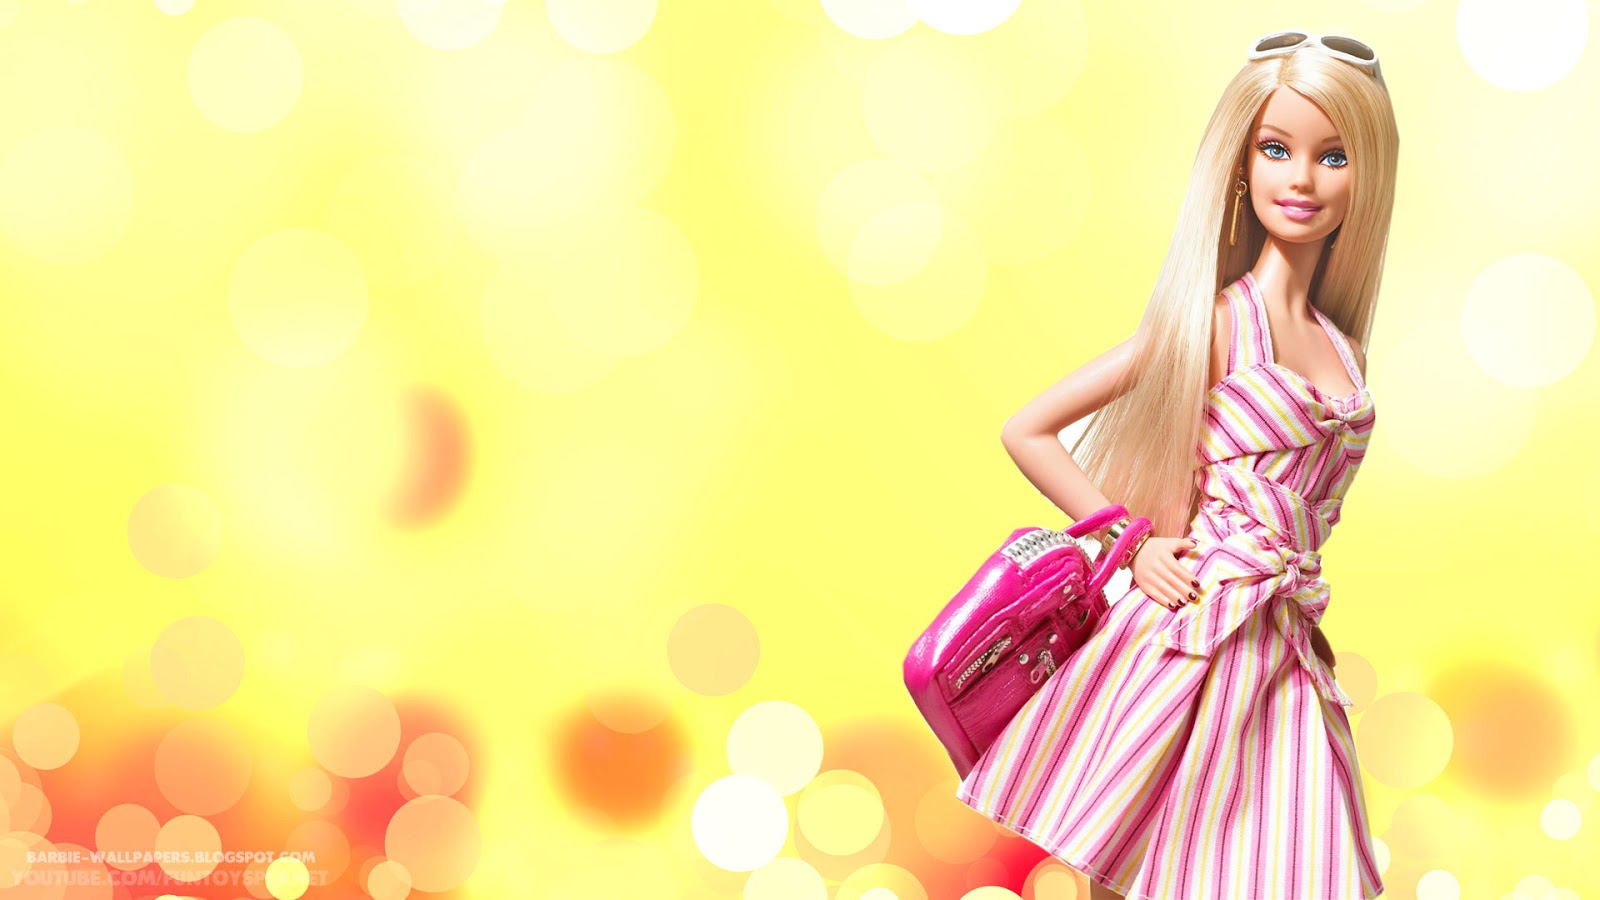 barbie pictures for wallpaper,pink,beauty,barbie,blond,dress